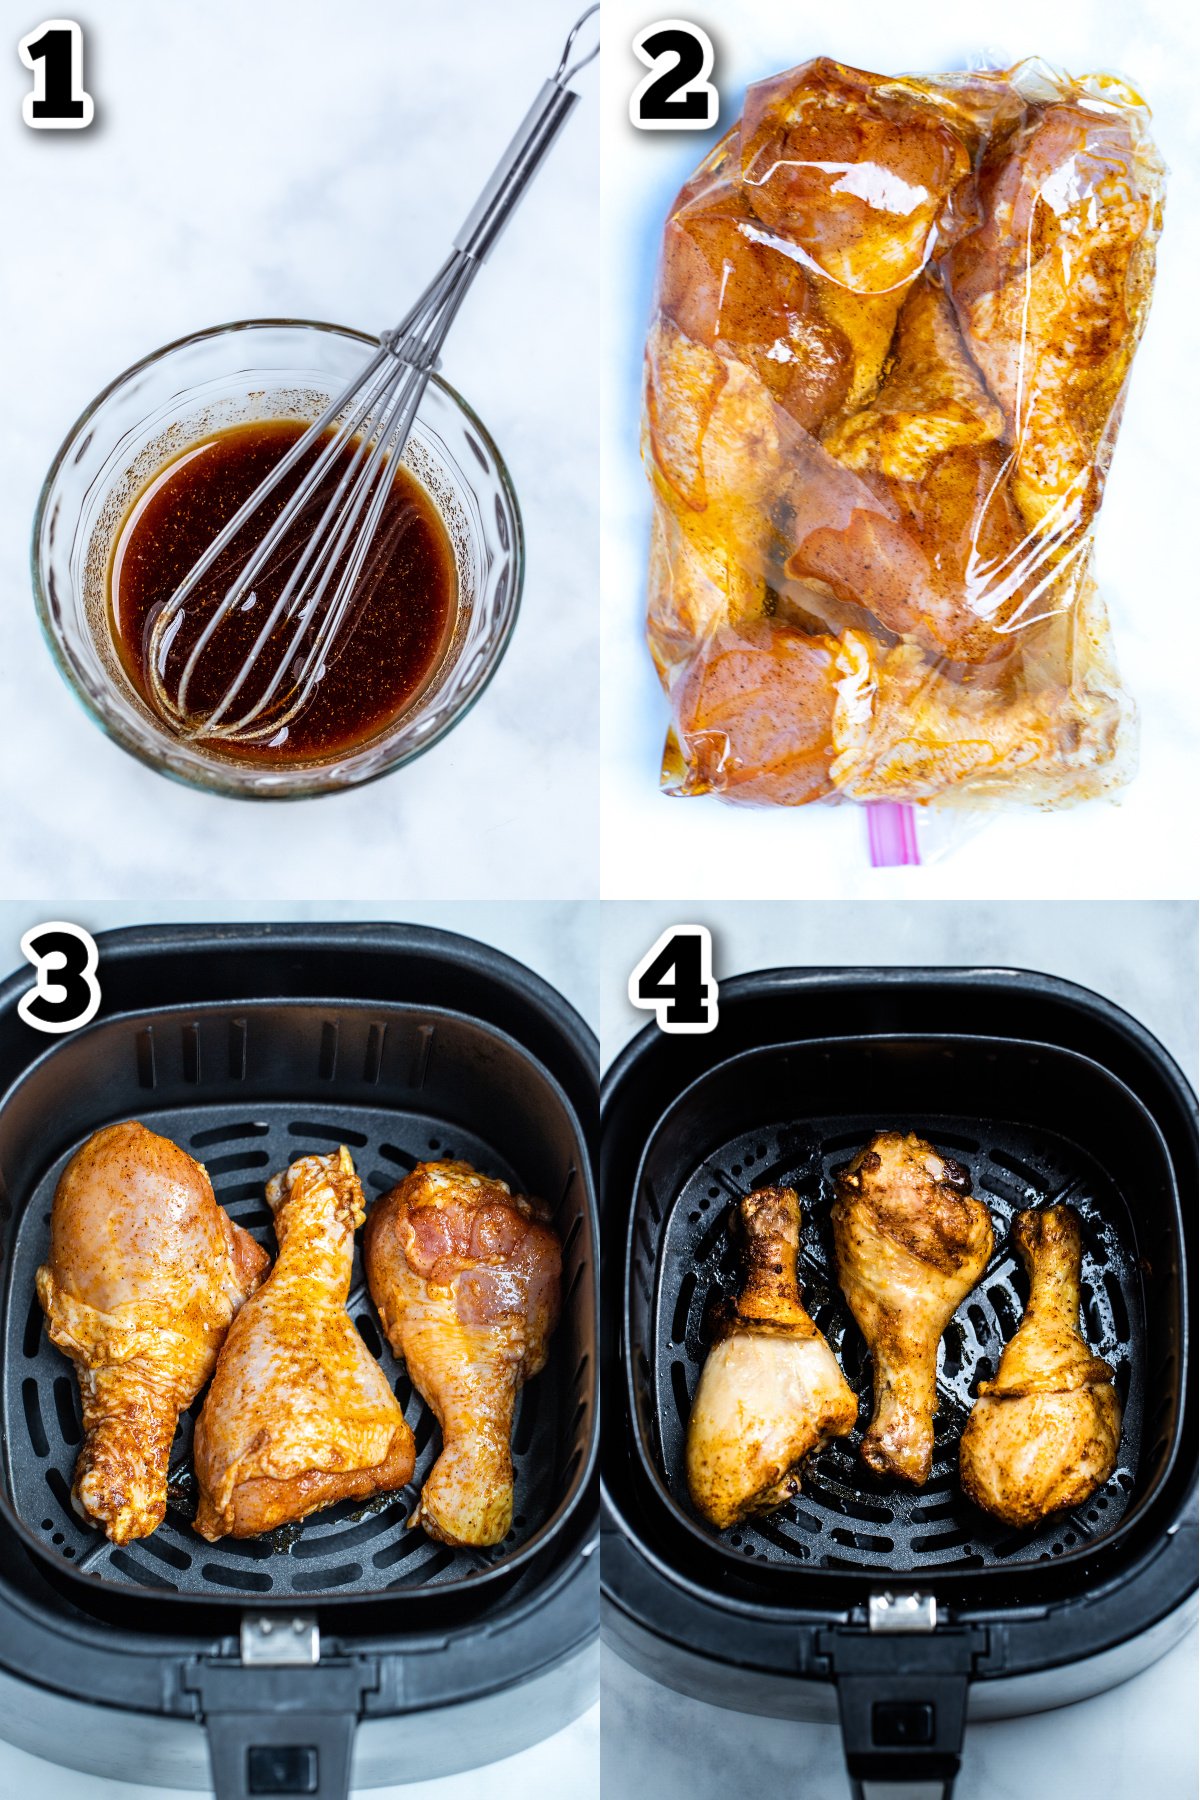 Step by step photos for how to make chicken drumsticks.